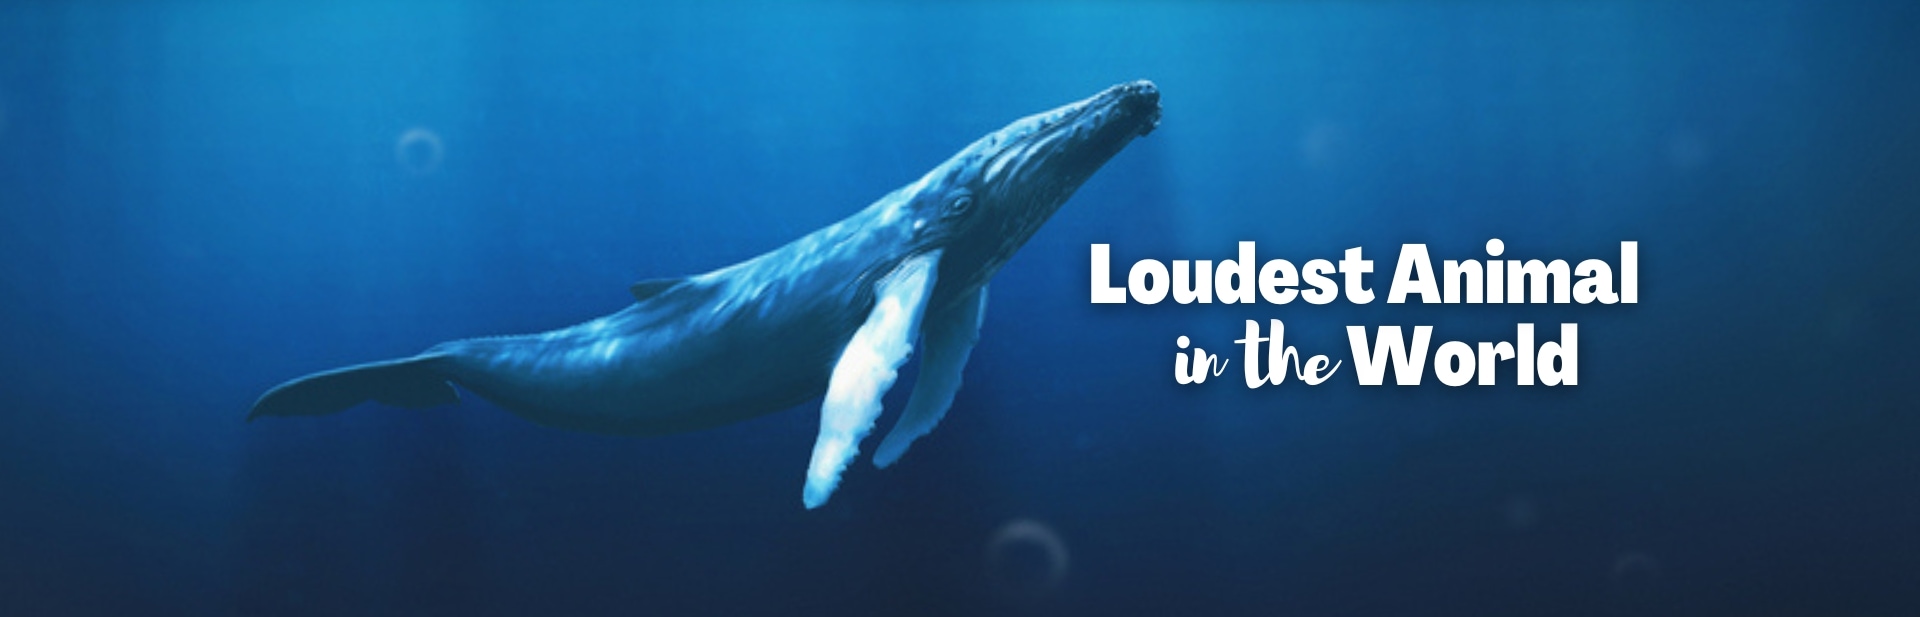 Nature’s 11 Loudest Voices: What Is the Loudest Animal in the World?